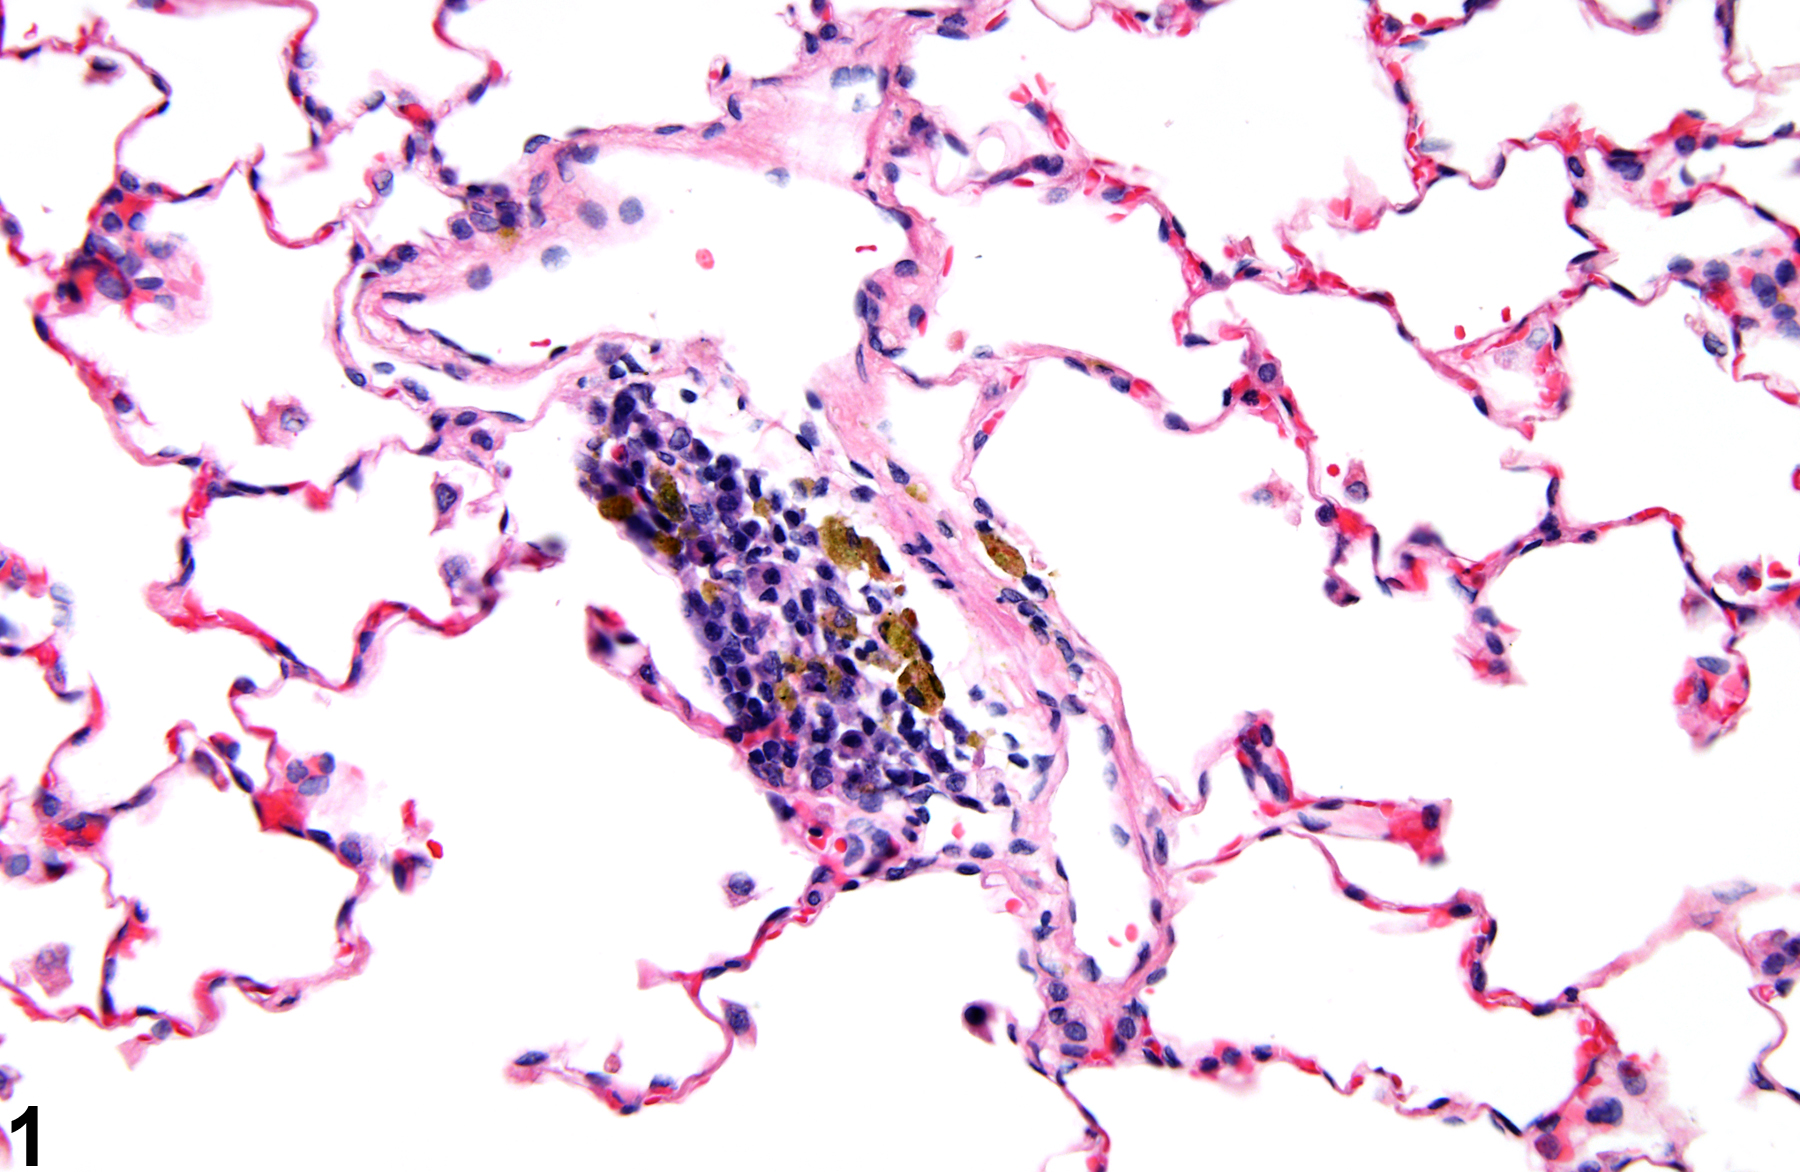 Image of alveolar pigment in the lung from a female Harlan Sprague-Dawley rat in a chronic study